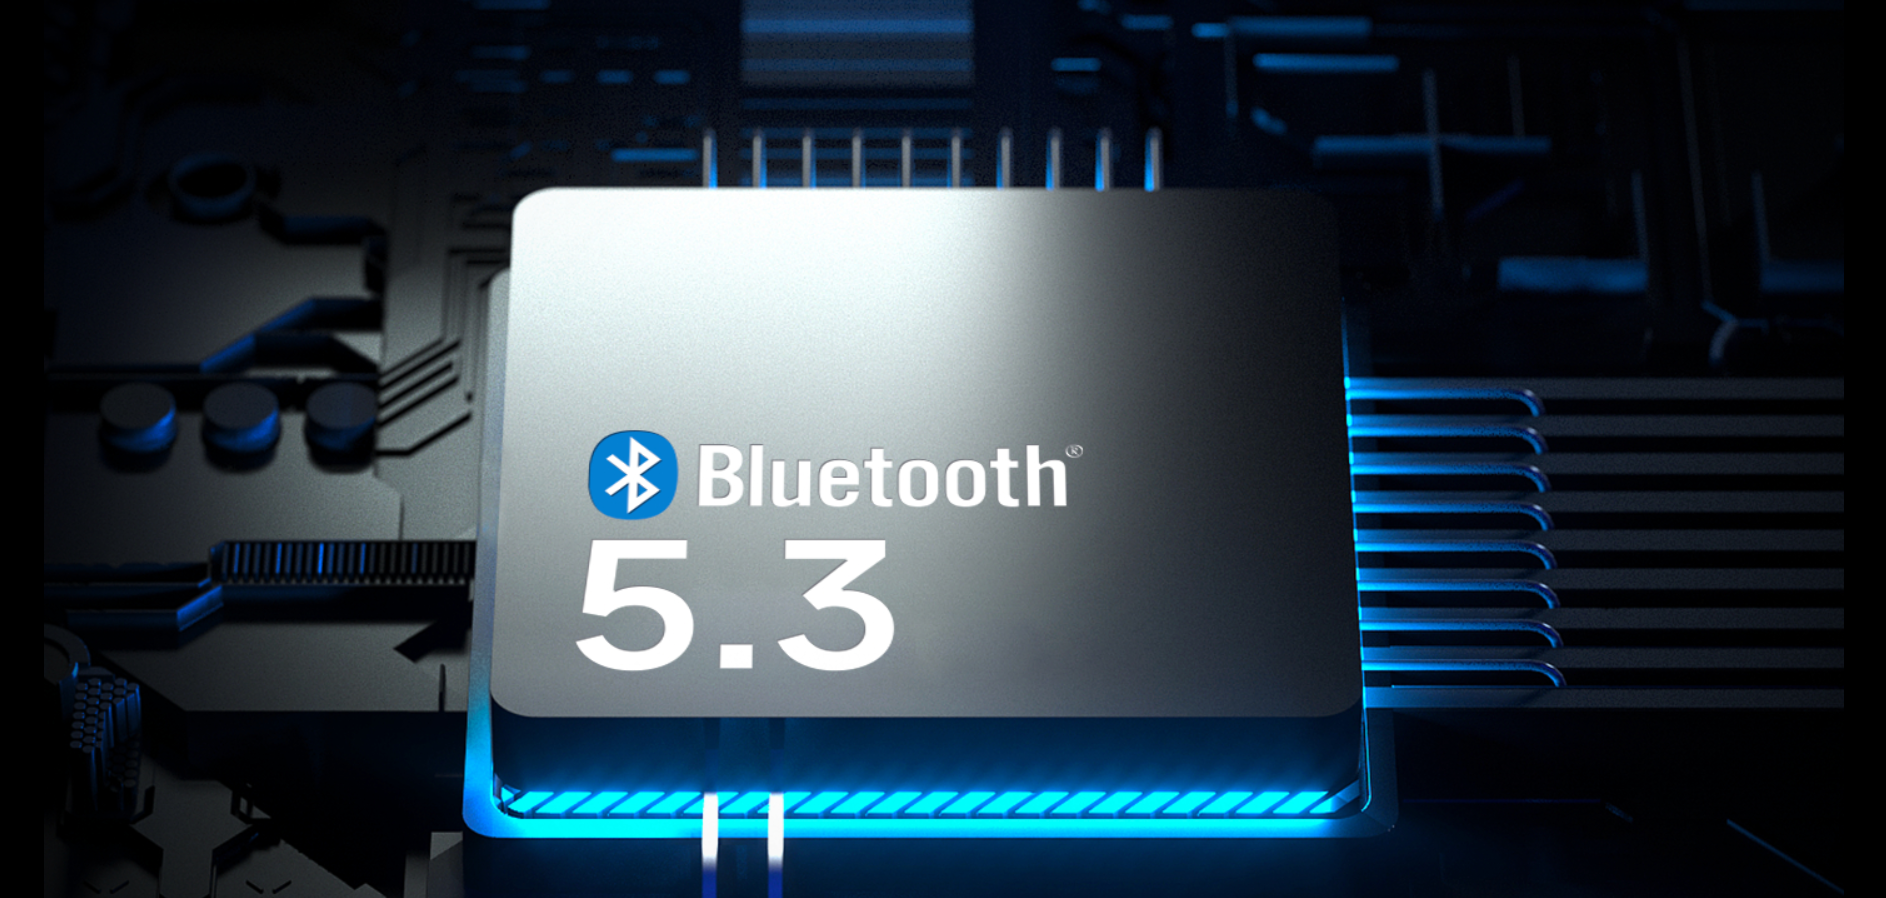 Redmi teases the upcoming K50 sequence because the most foremost smartphones to commence with Bluetooth 5.3